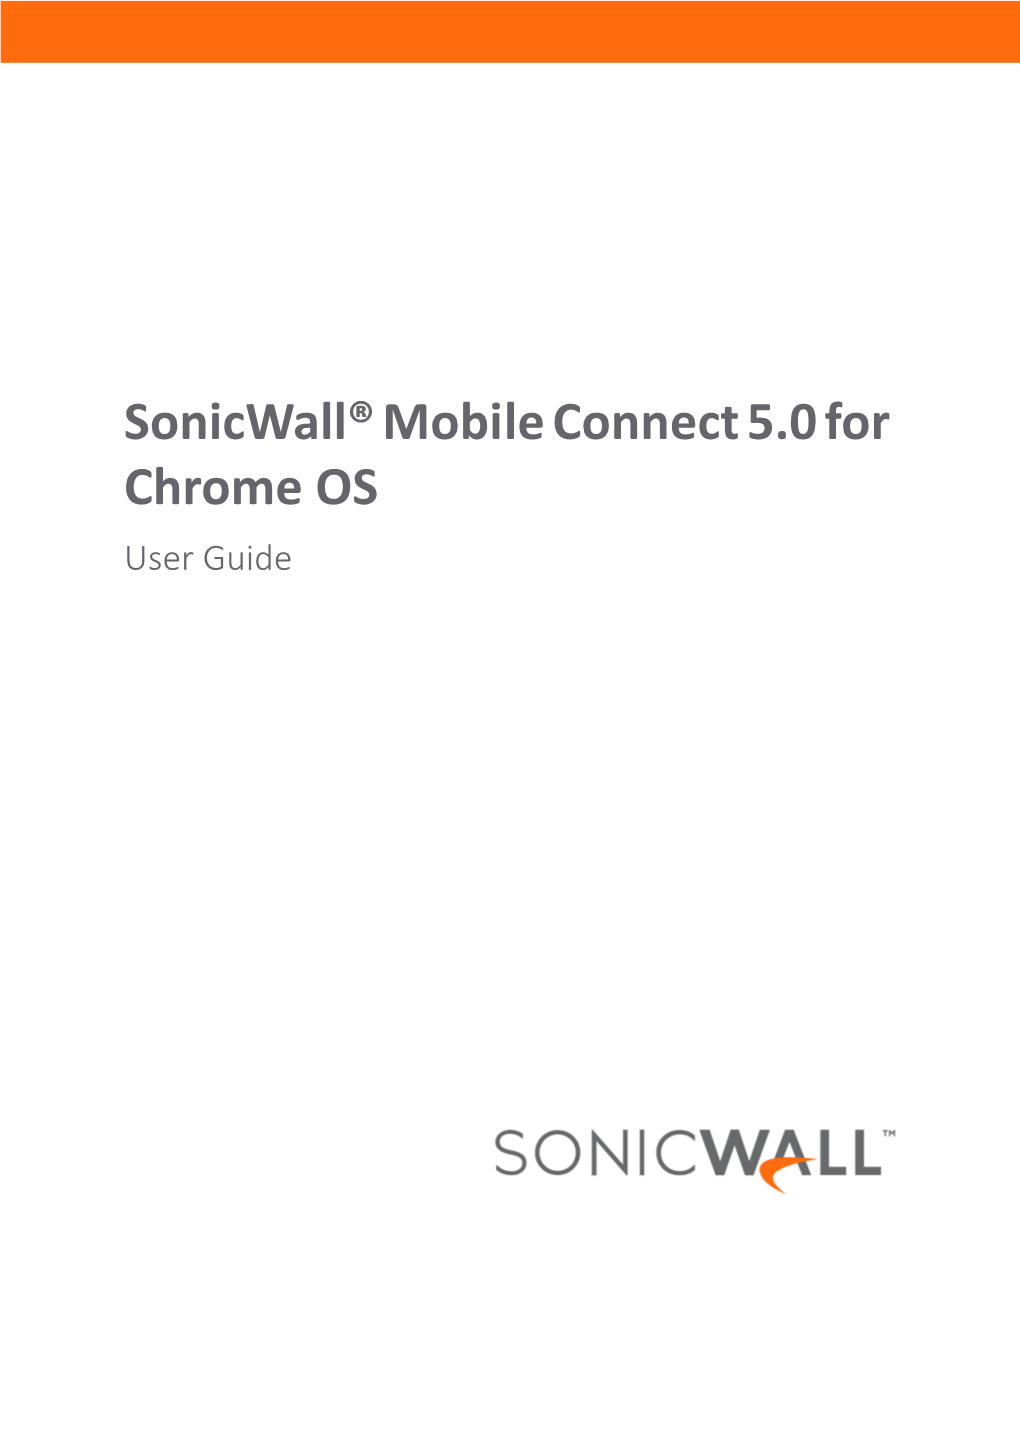 Sonicwall® Mobile Connect 5.0 for Chrome OS User Guide Contents 1